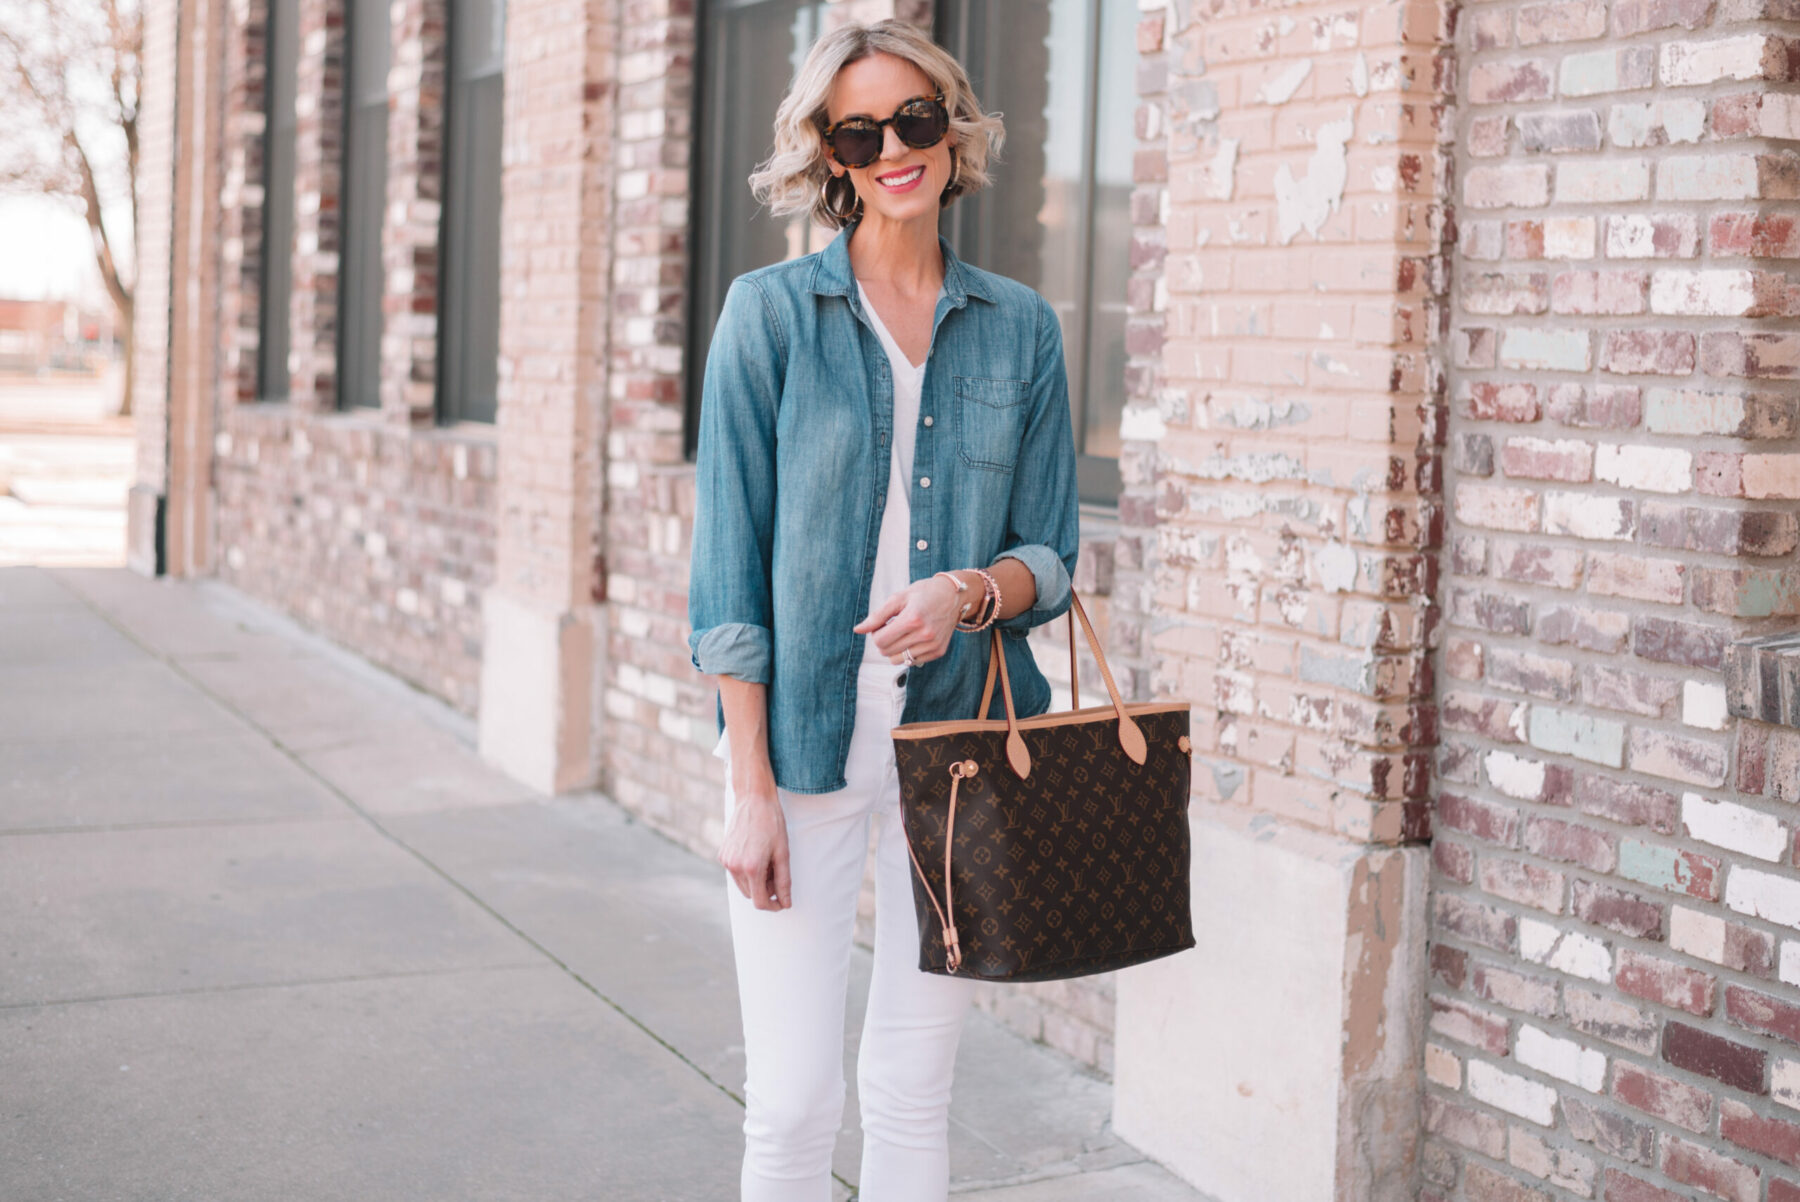 Mini Casual Capsule Wardrobe - 4 Ways to Wear a Chambray Shirt - Straight A  Style